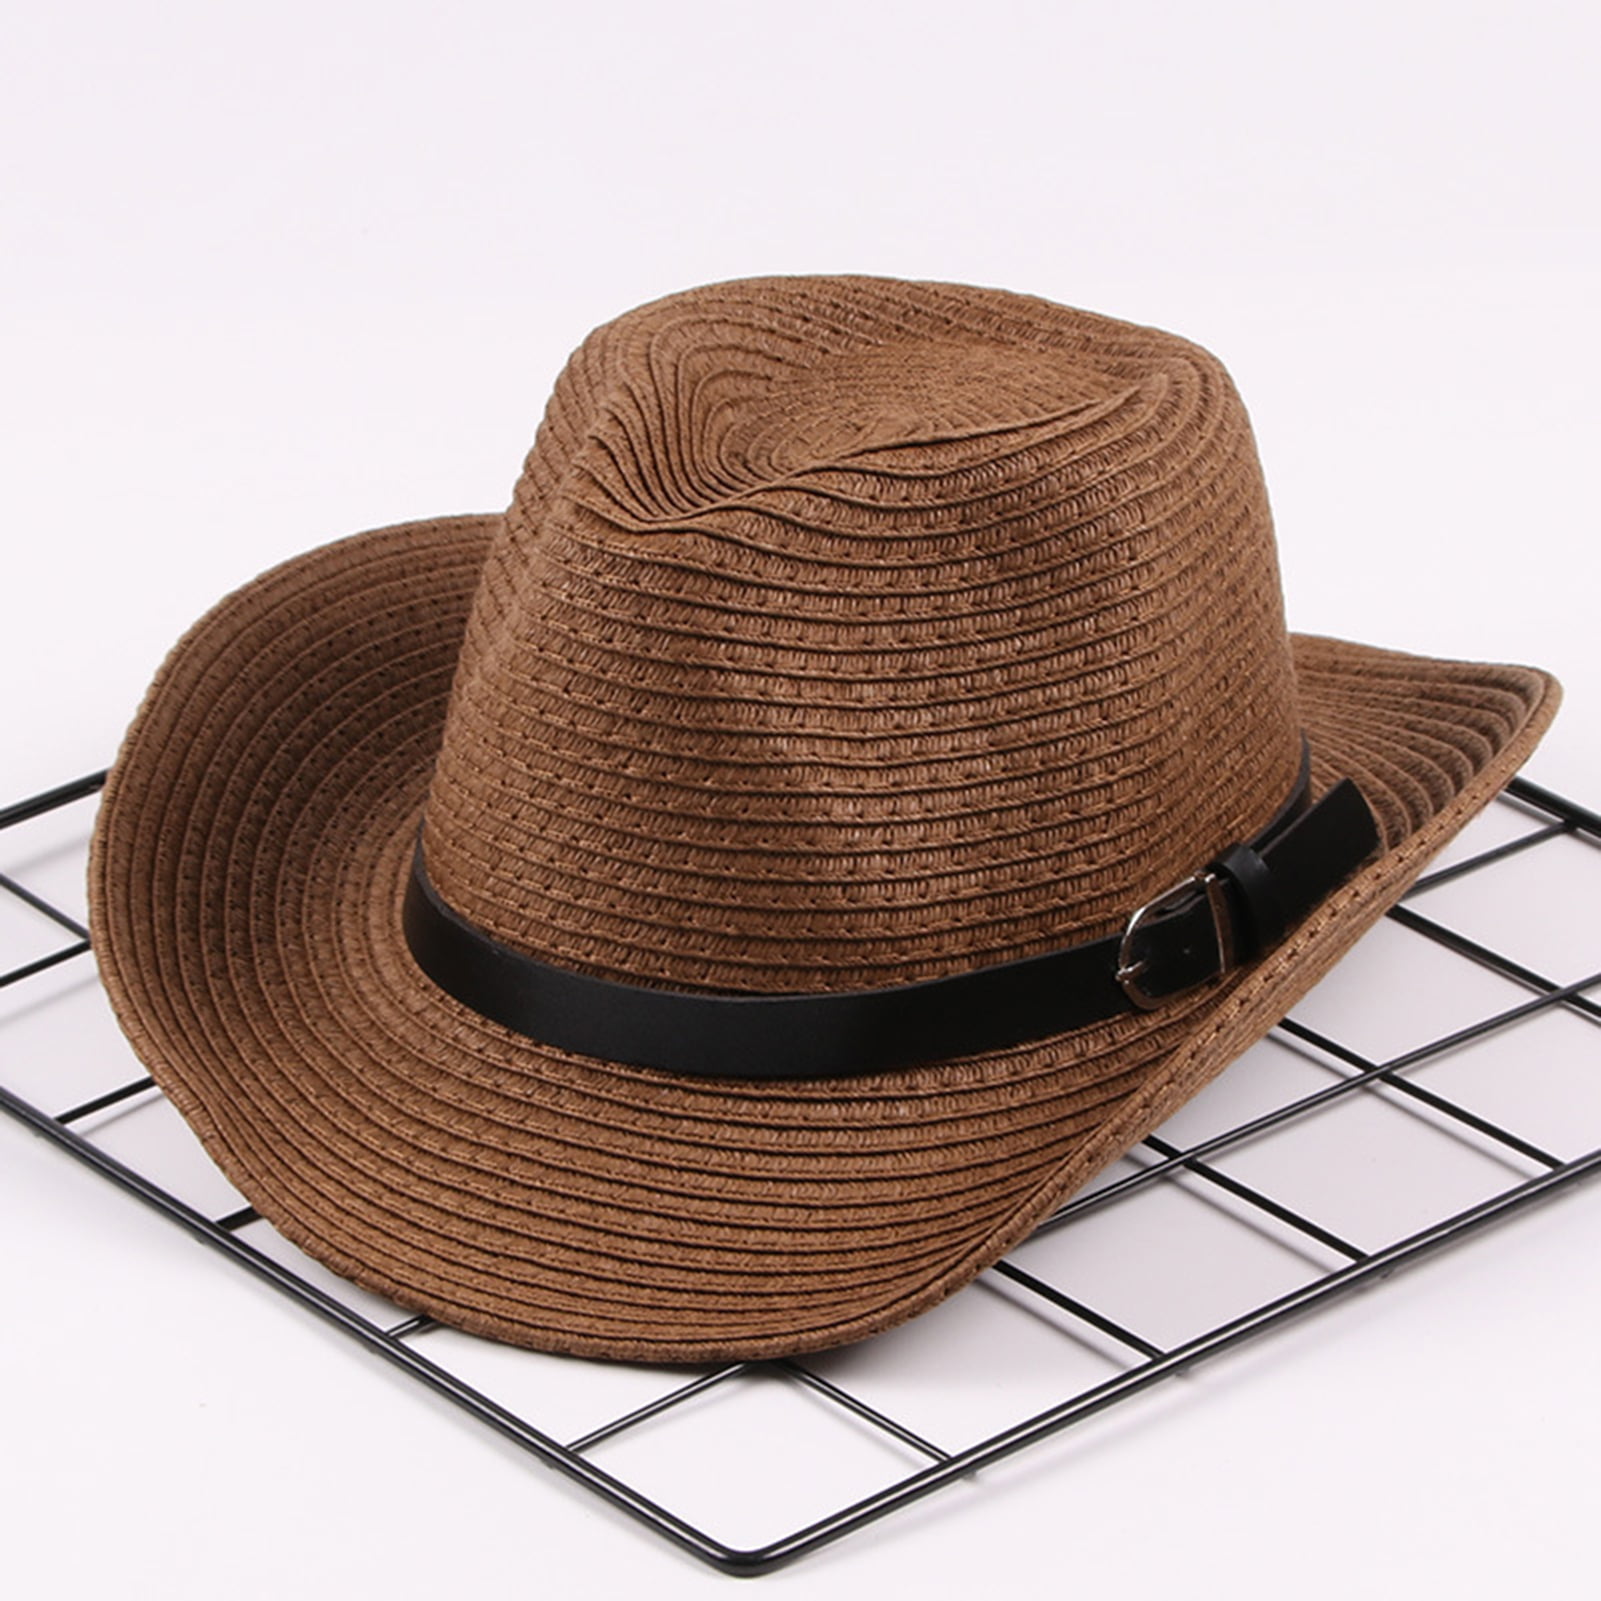 12 Pcs Straw Cowboy Hats for Women Men, Wide Brim Summer Hat Bulk Panama  Sun Protection Hats for Western Themed Party Travel Decorations Brown